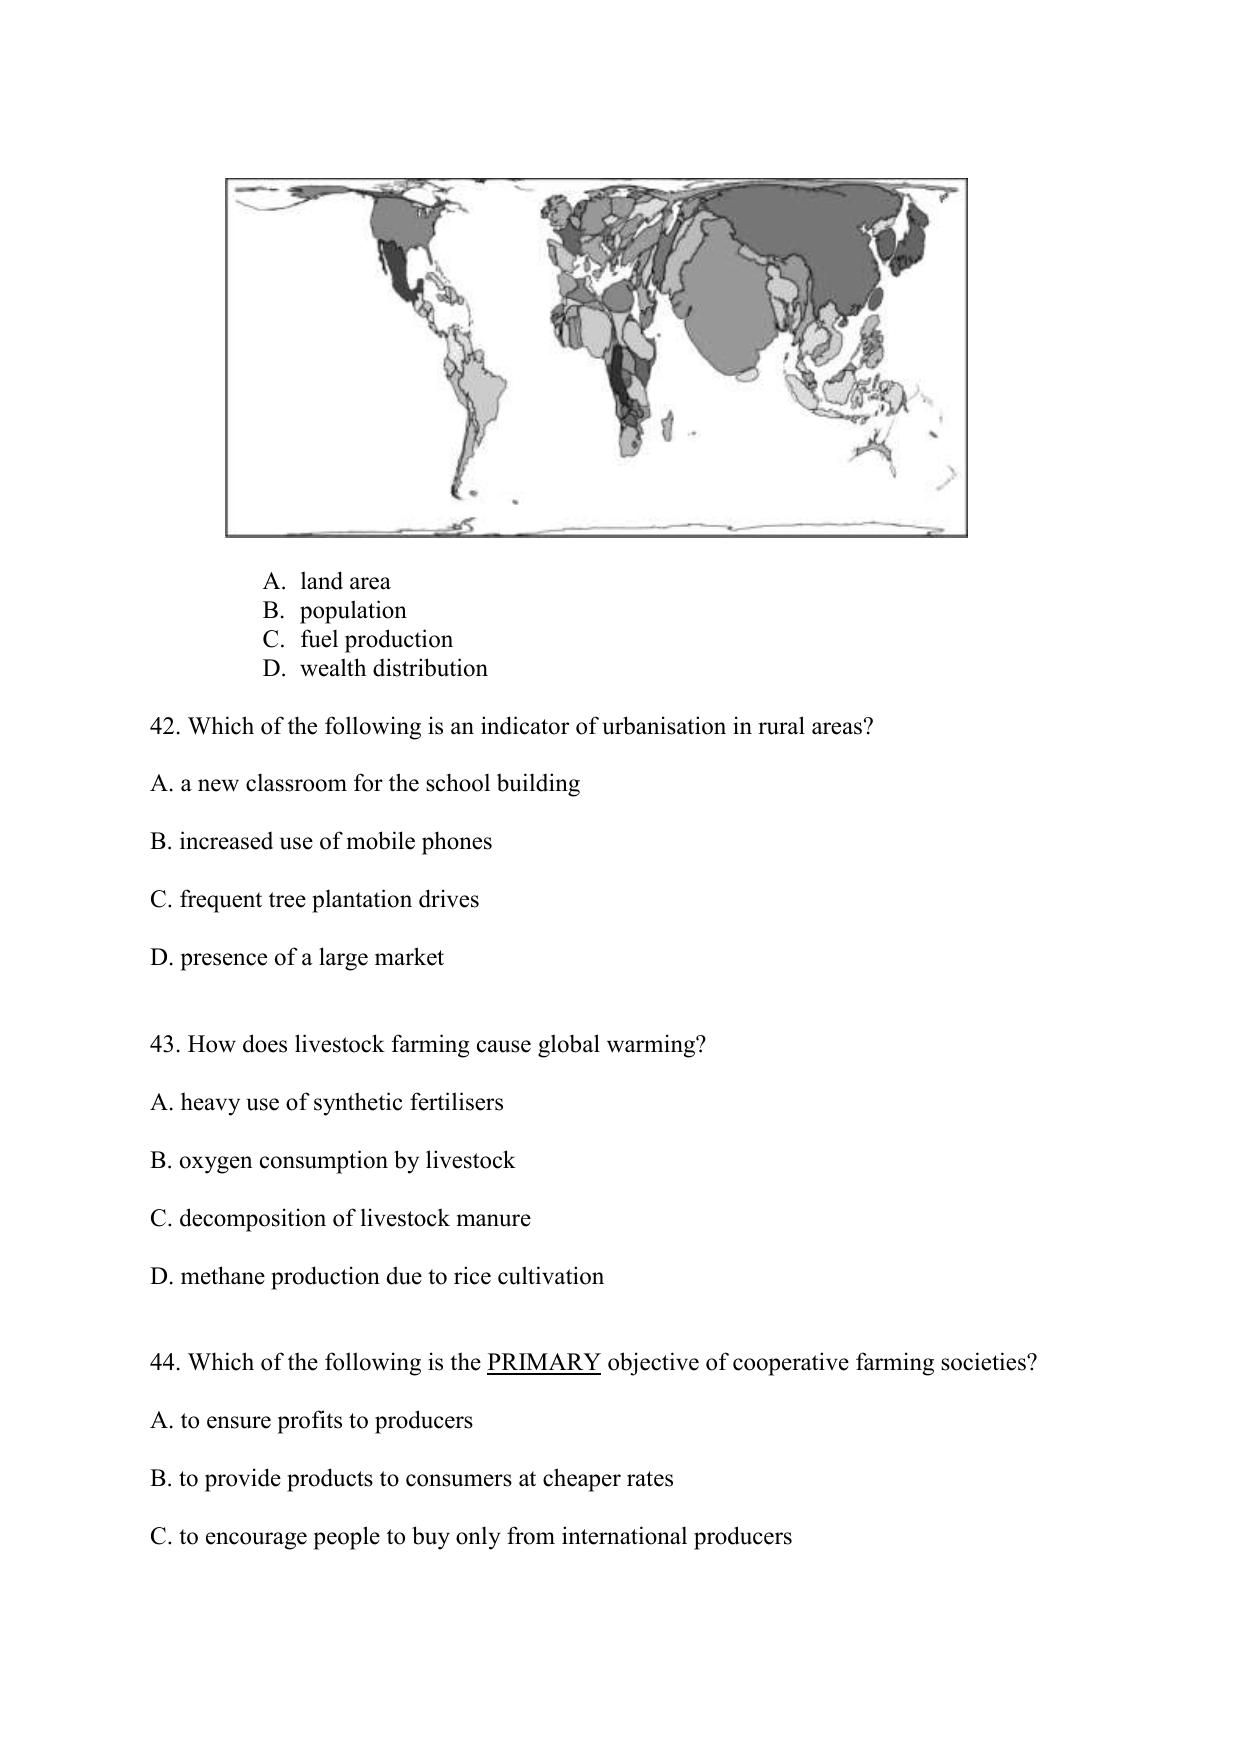 CBSE Class 12 Geography Term 1 Practice Questions 2021-22 - Page 15